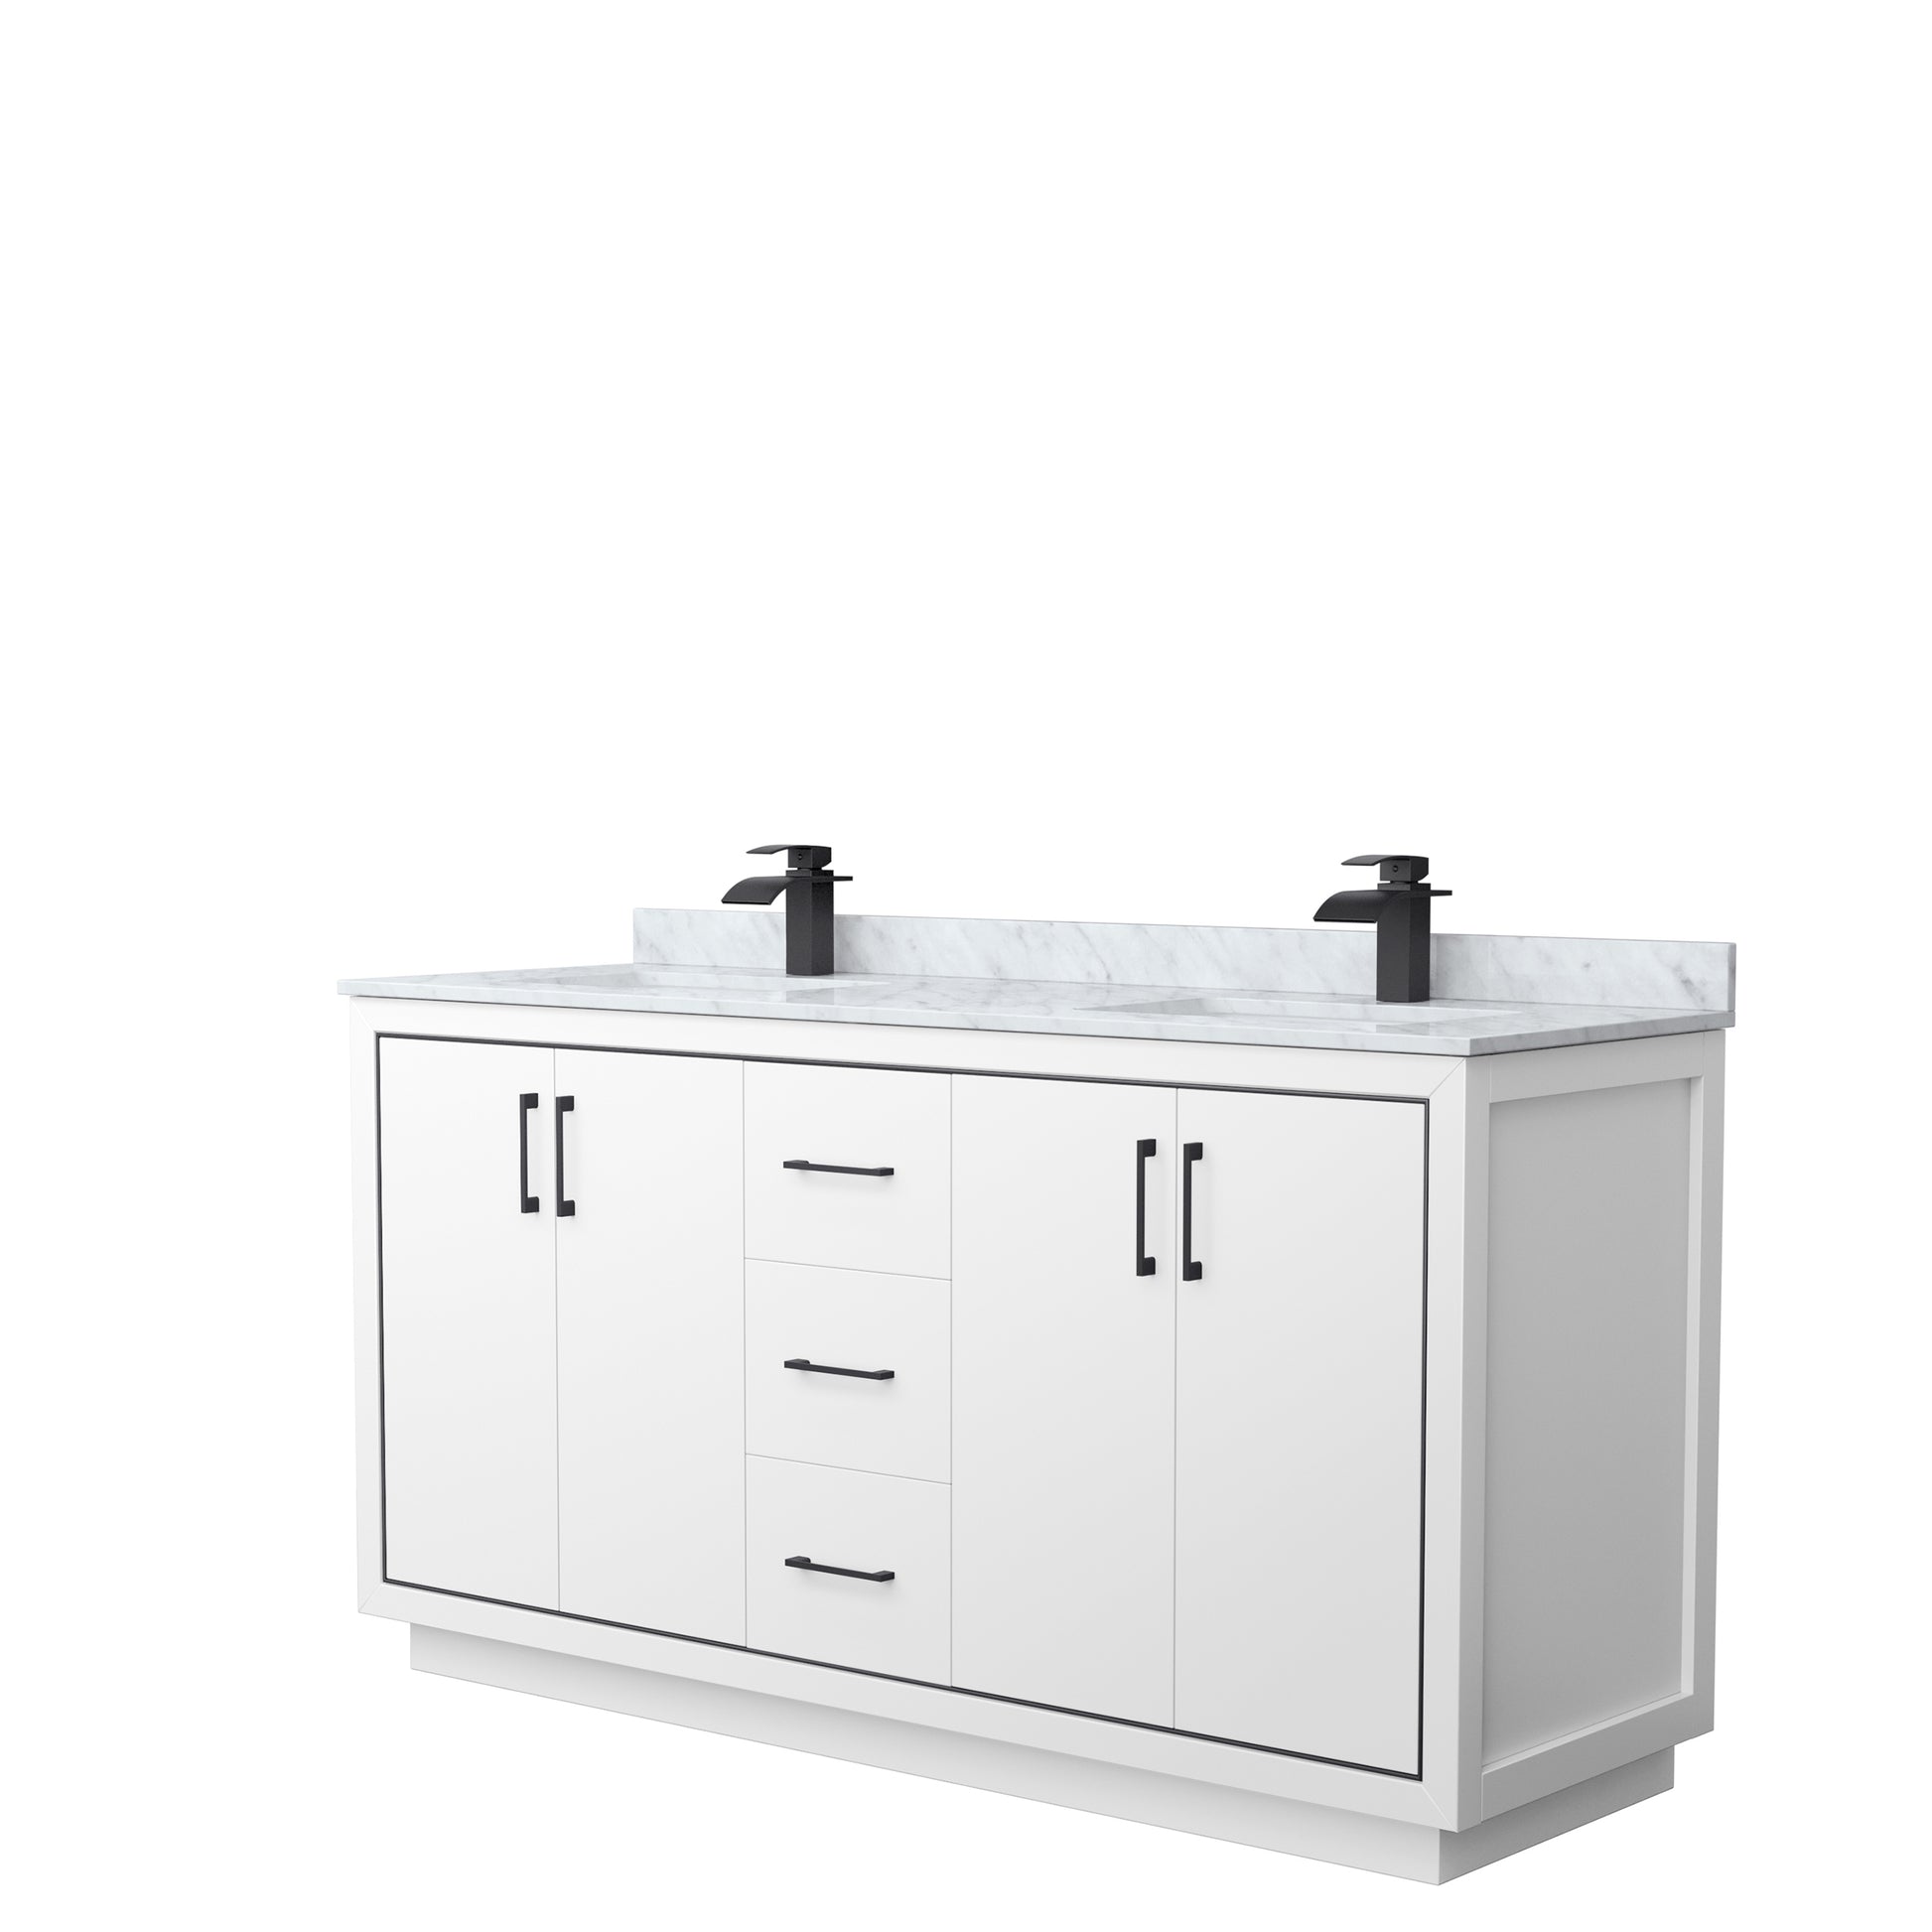 
  
  Icon Double Sink Vanity with White Carrara Marble Countertop, Undermount Square Sink, Optional Trim and Mirror
  
